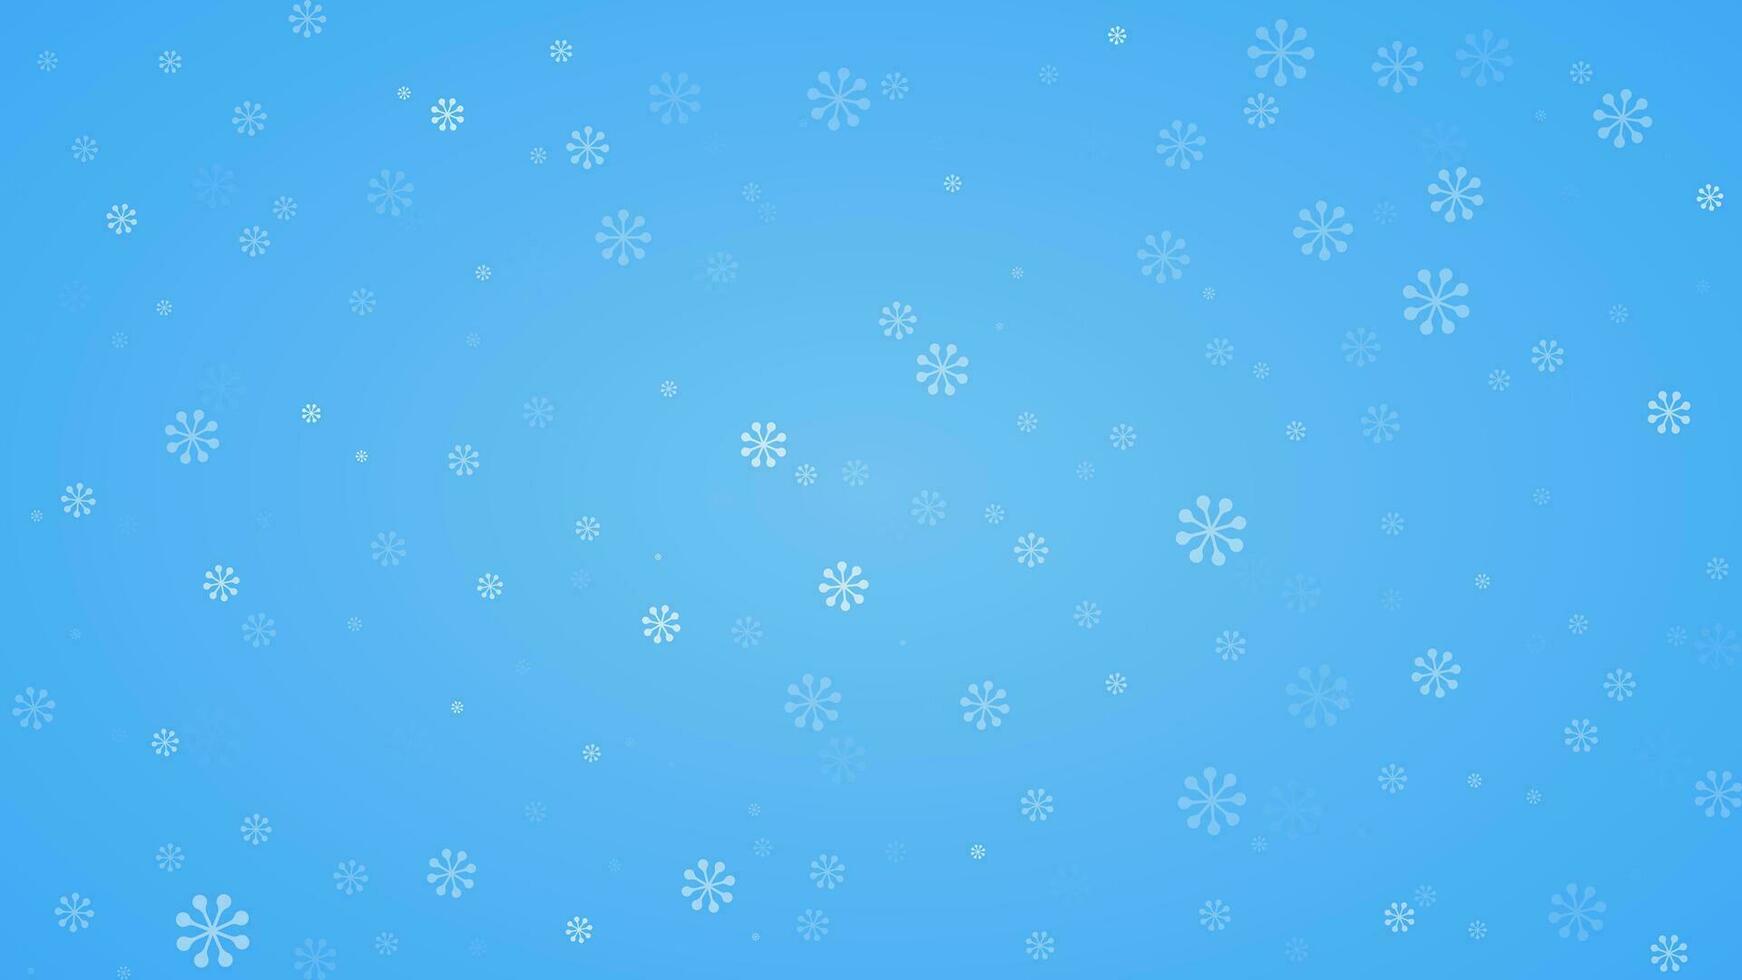 Snowflake on winter blue sky background. Christmas vector illustration design for backdrop, postcard. Christmas snowy winter design. White falling snowflakes, abstract landscape. Cold weather effect.